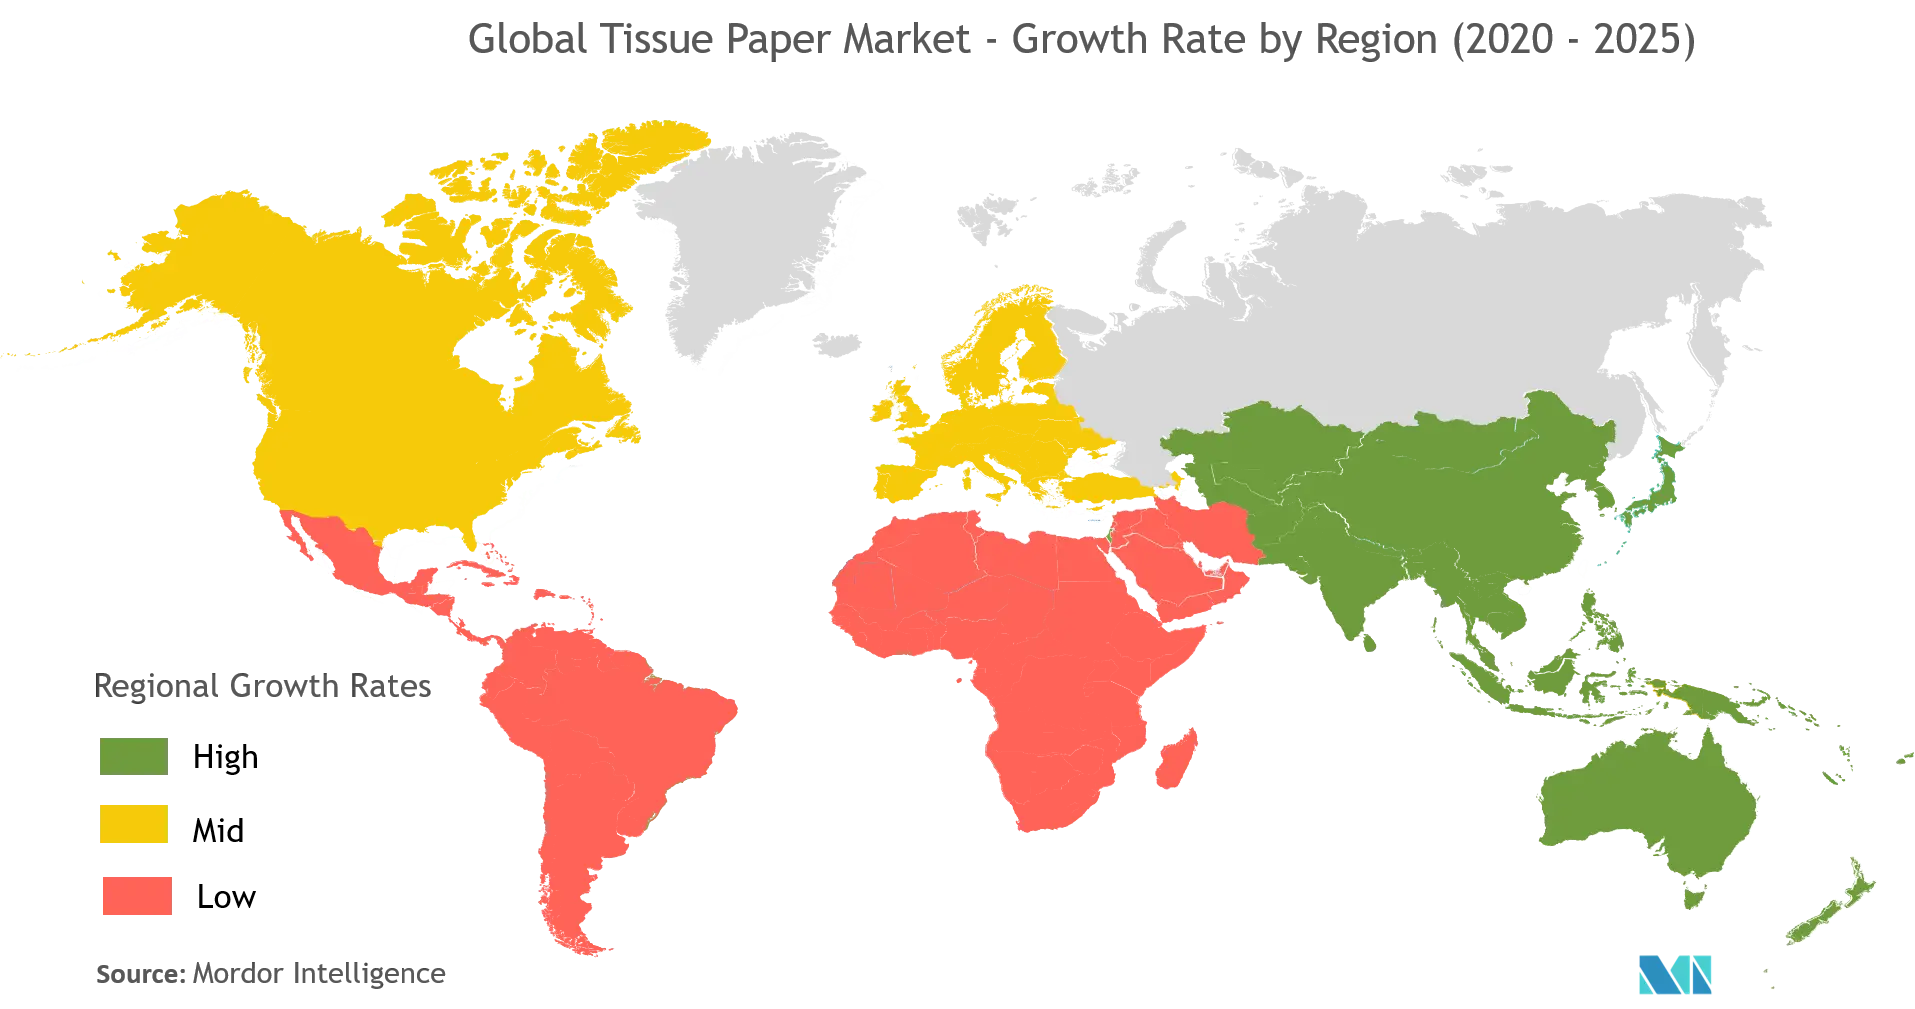 Global Tissue Paper Market : Growth Rate by Region (2020-2025)